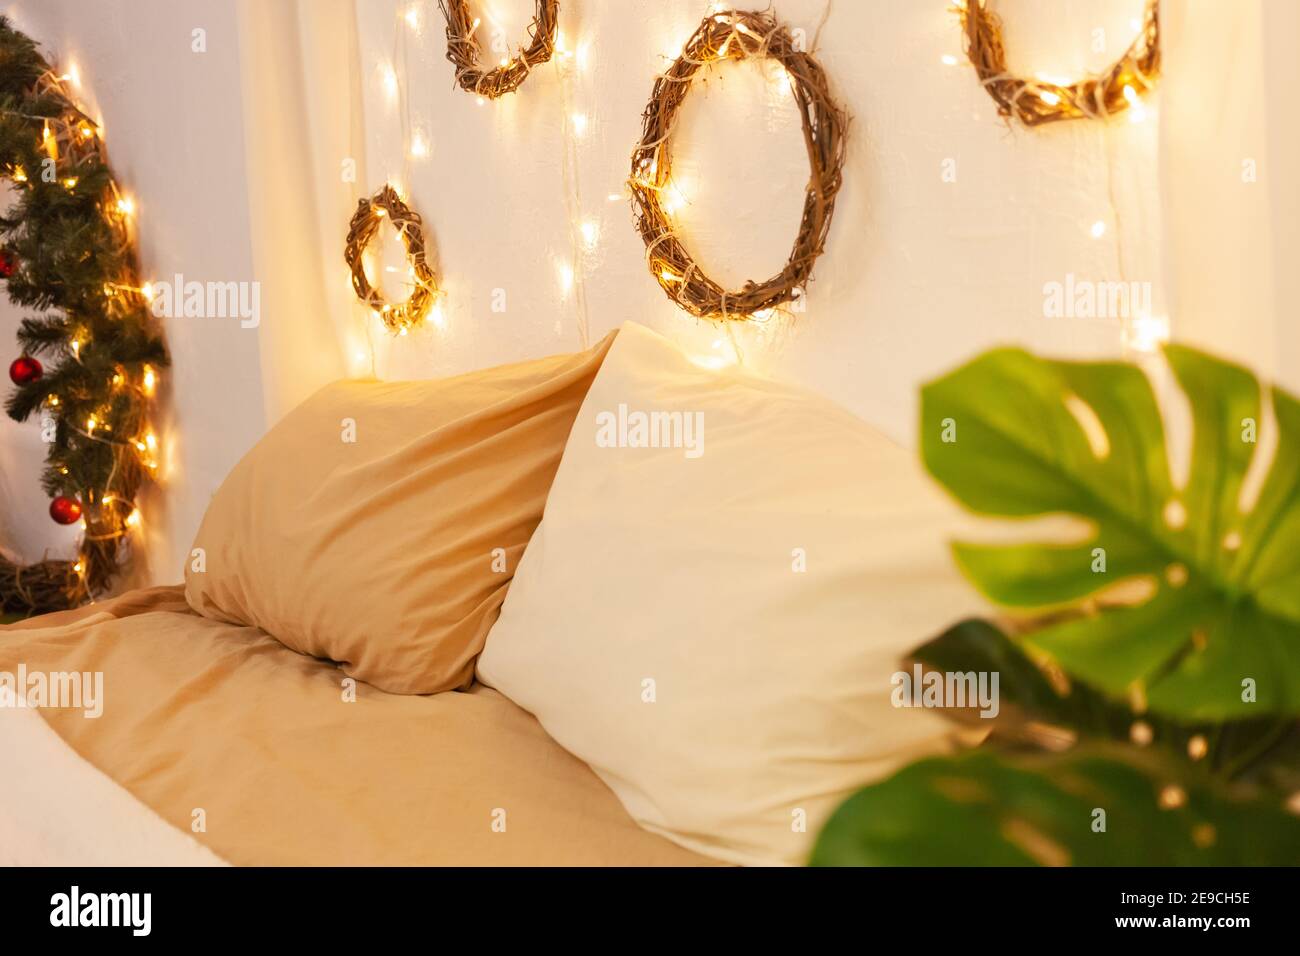 https://c8.alamy.com/comp/2E9CH5E/christmas-photo-zone-bedroom-bed-with-two-pillows-home-monstera-plant-the-walls-are-decorated-with-new-years-wreaths-of-branches-and-lights-yell-2E9CH5E.jpg